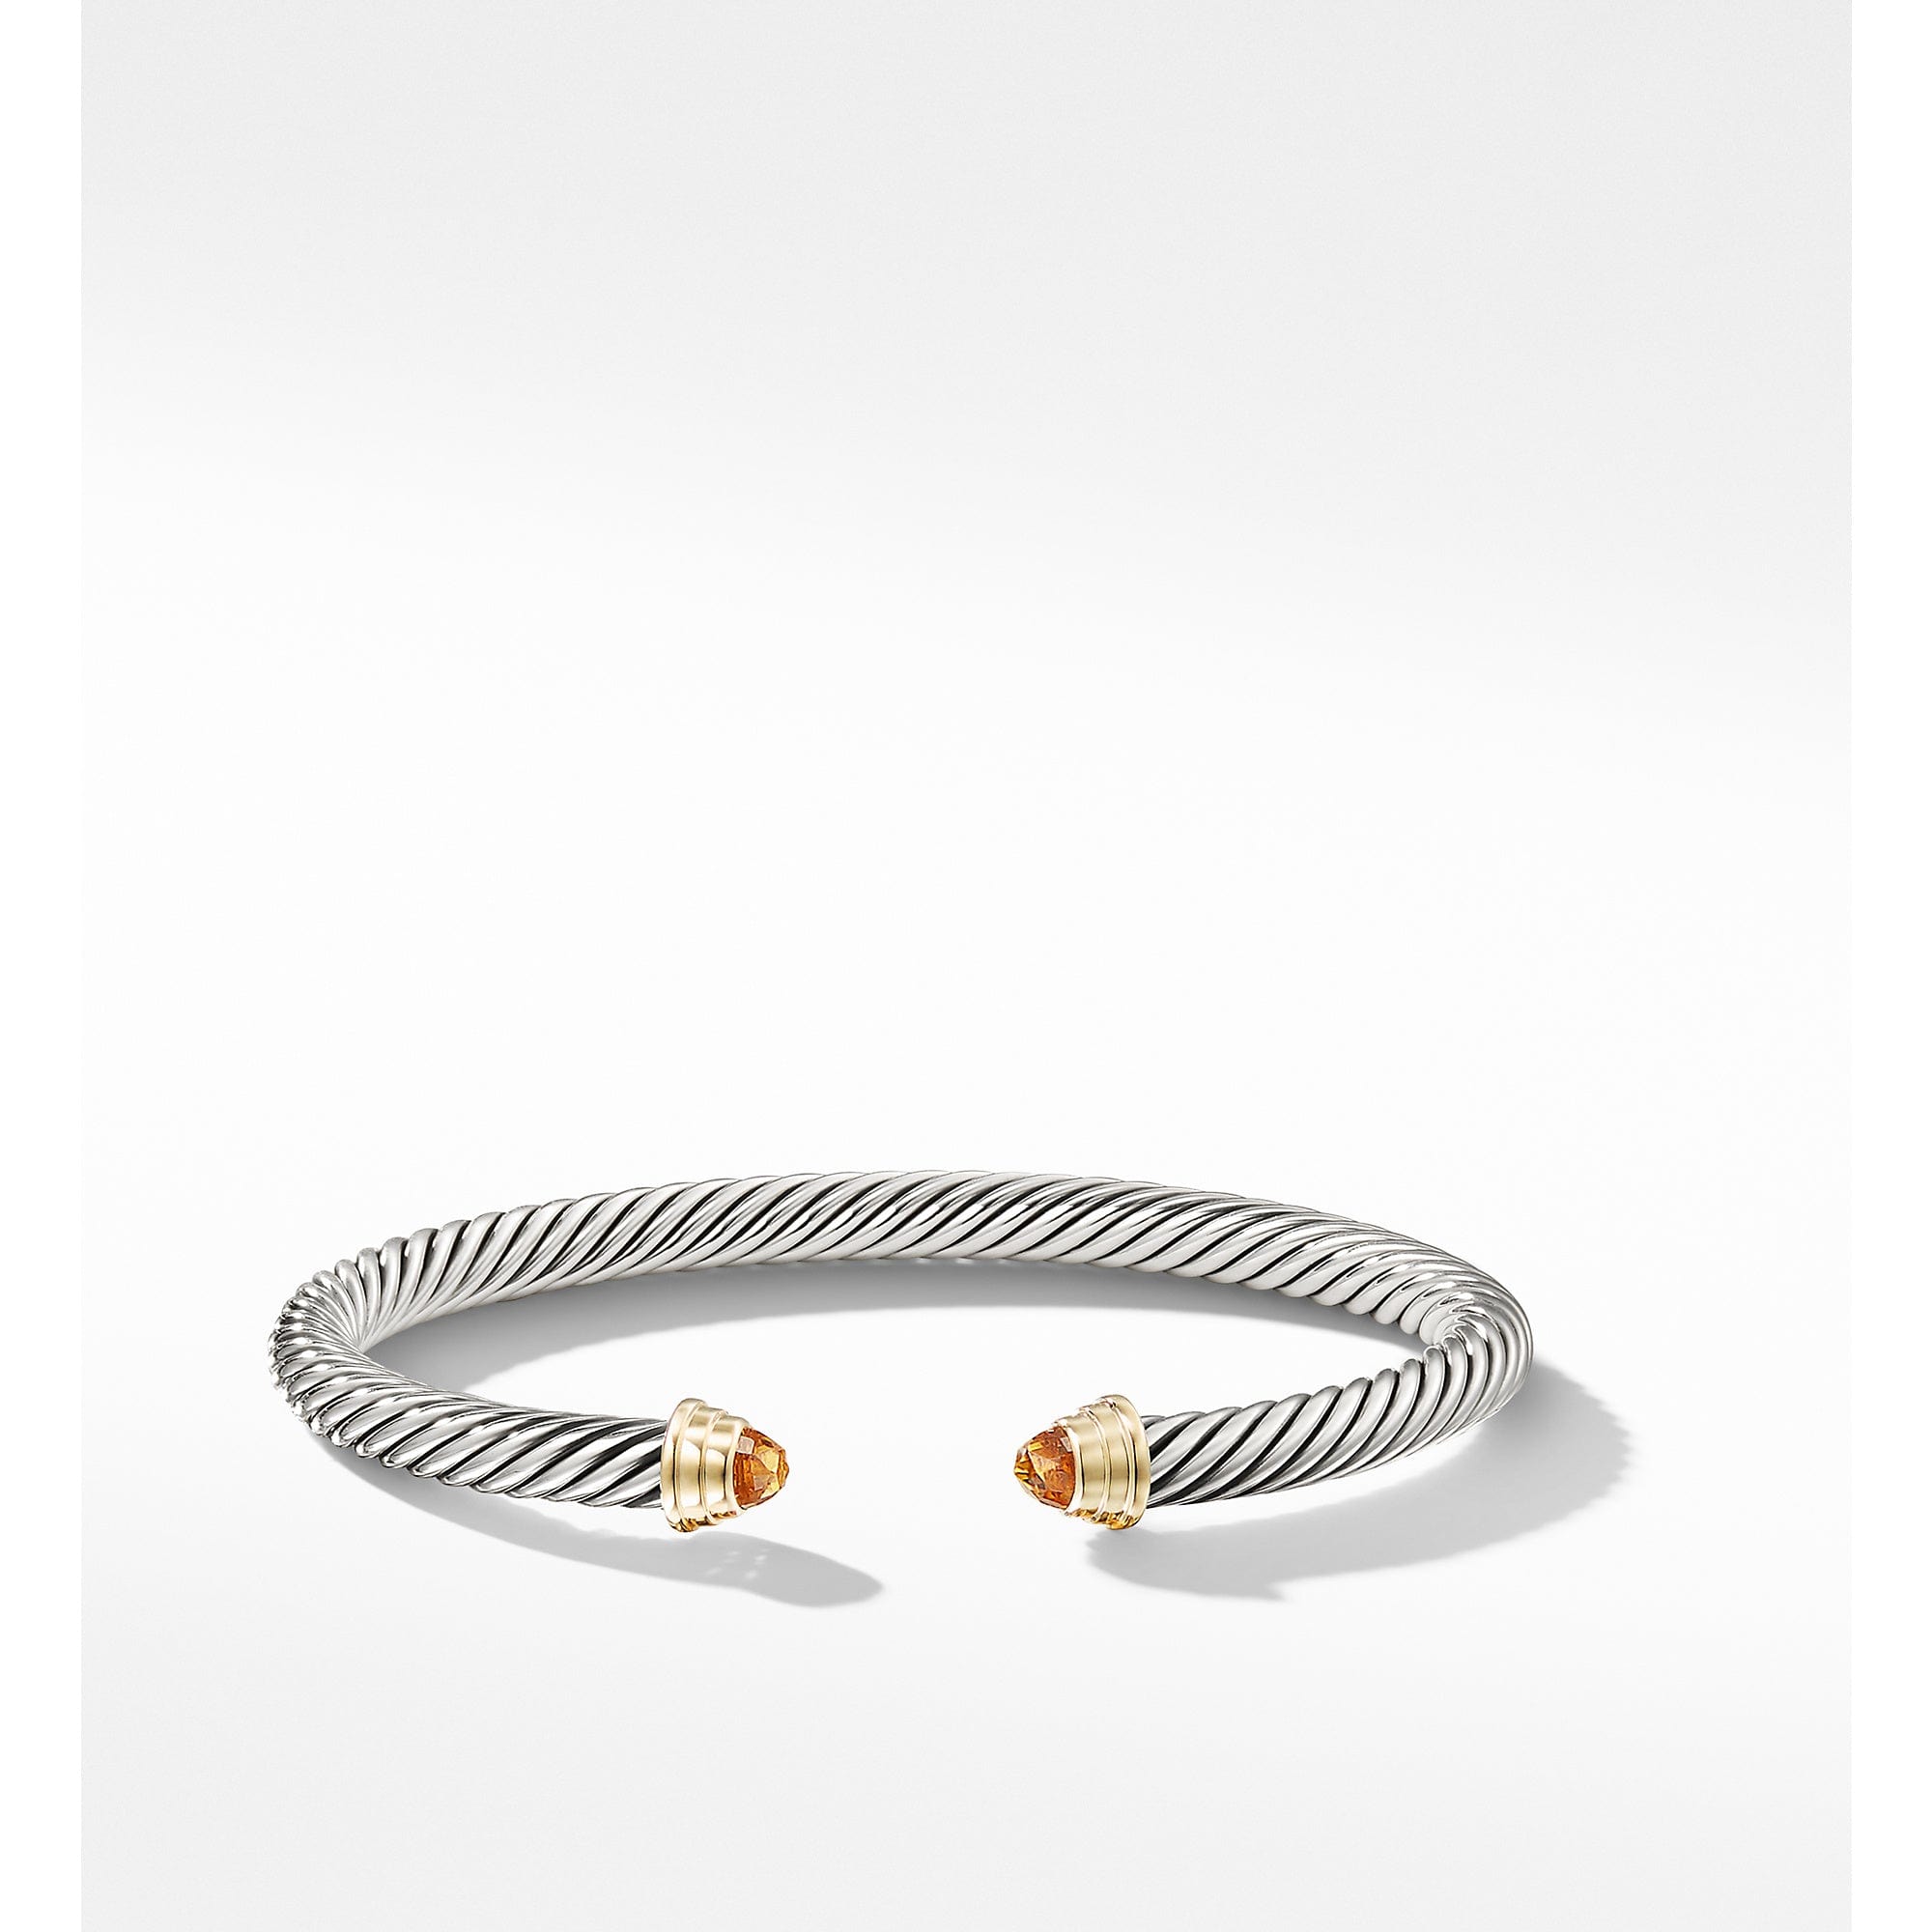 Cable Kids® Birthstone Bracelet with Citrine and 14K Gold, 4mm